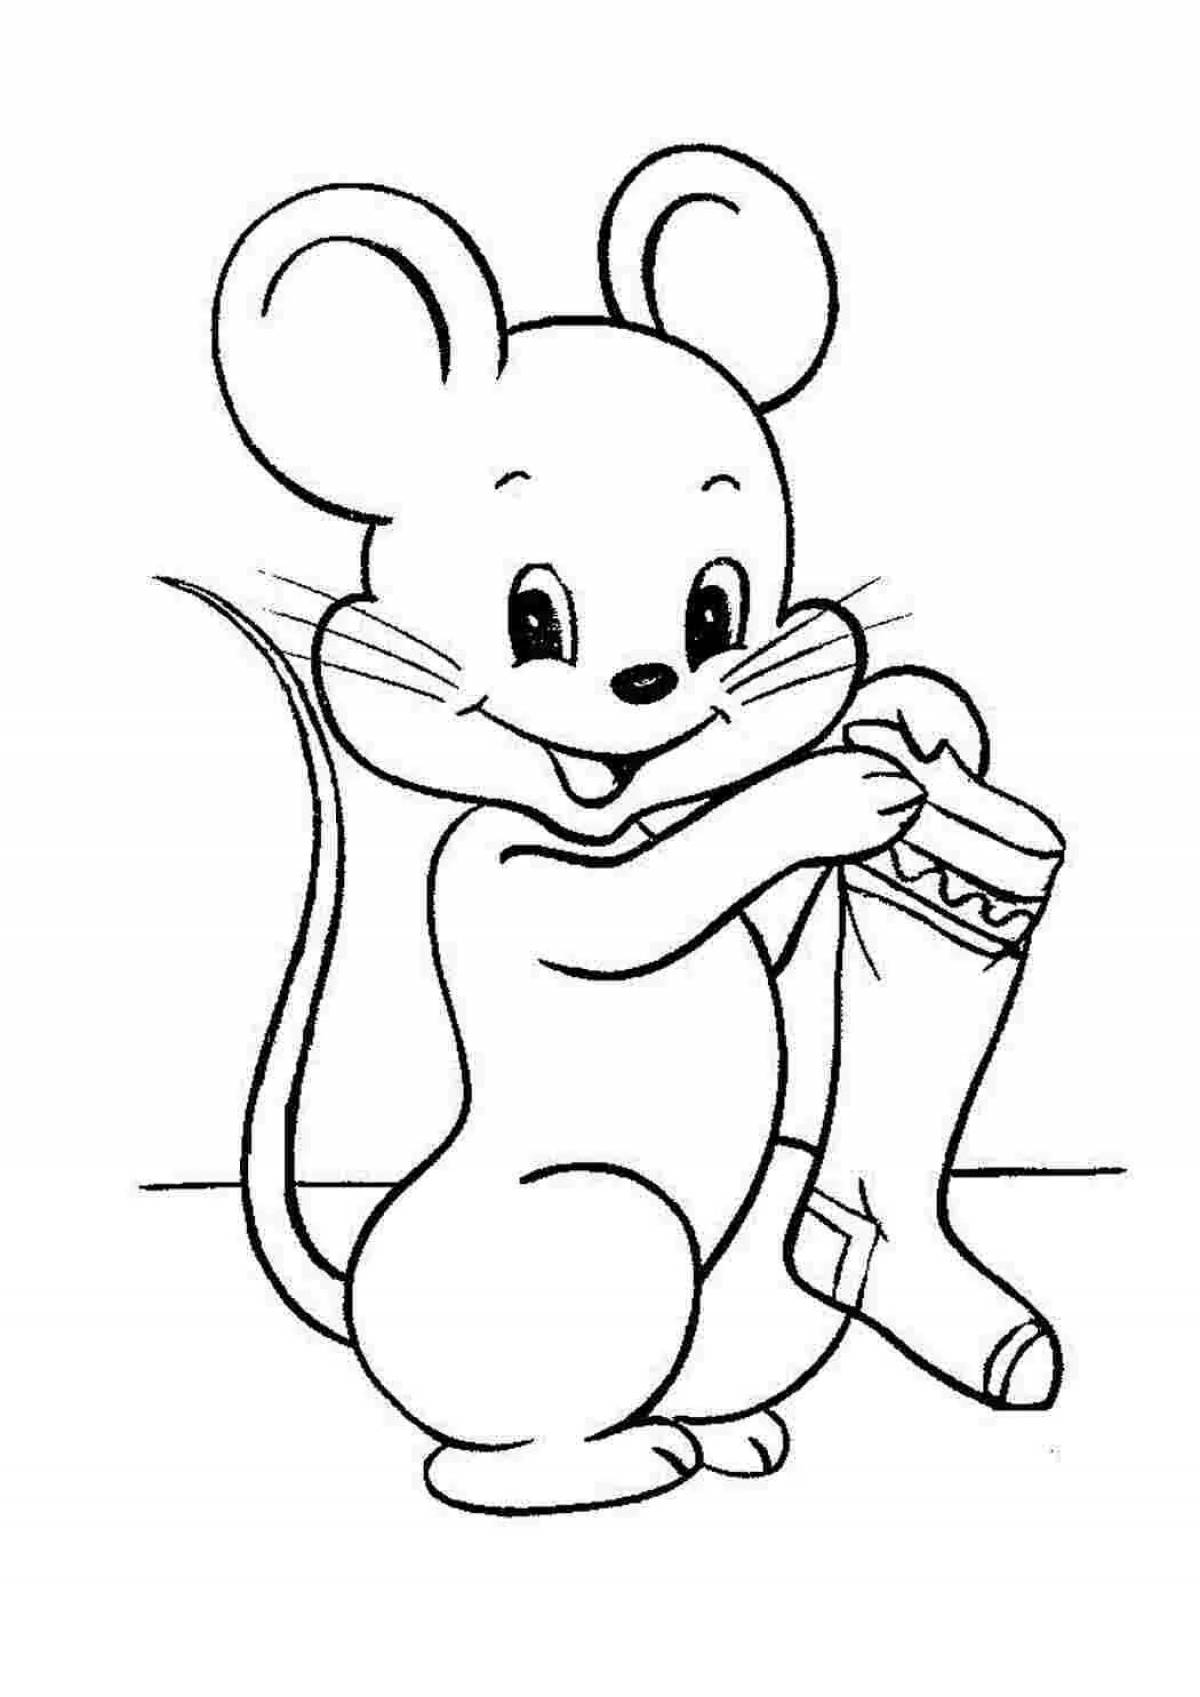 Exuberant mouse drawing